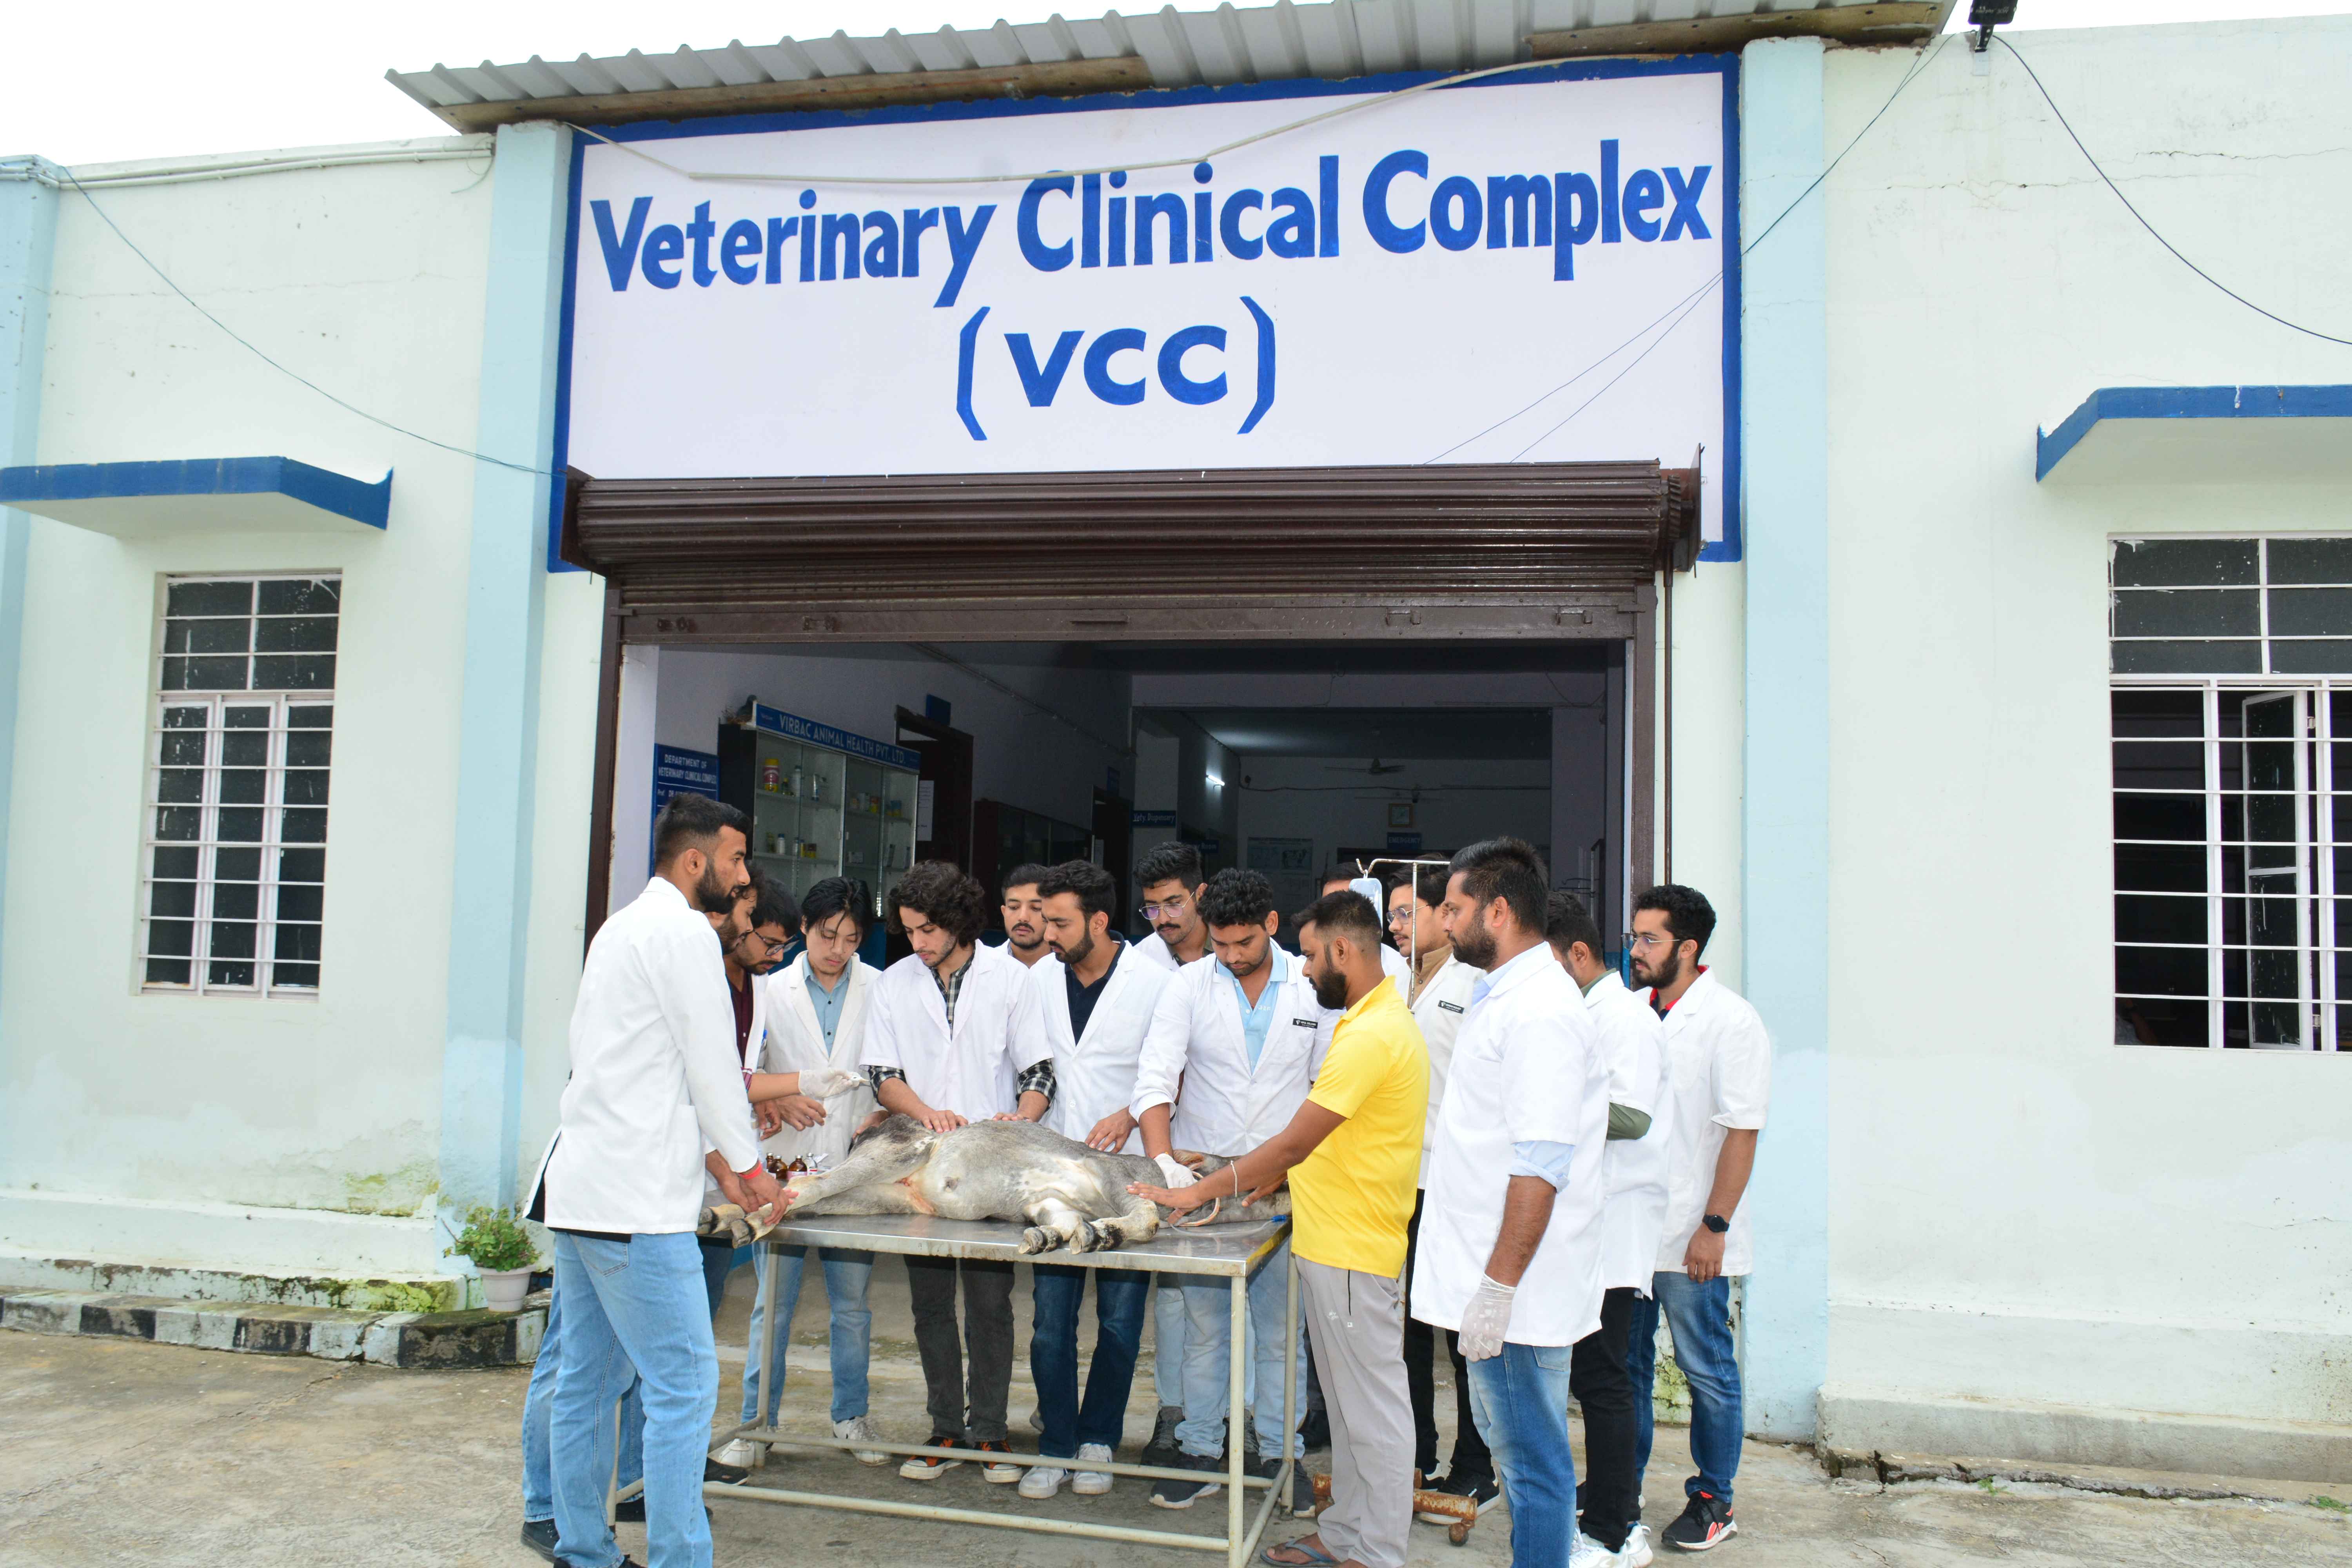 Veterinary Clinical Complex (VCC)